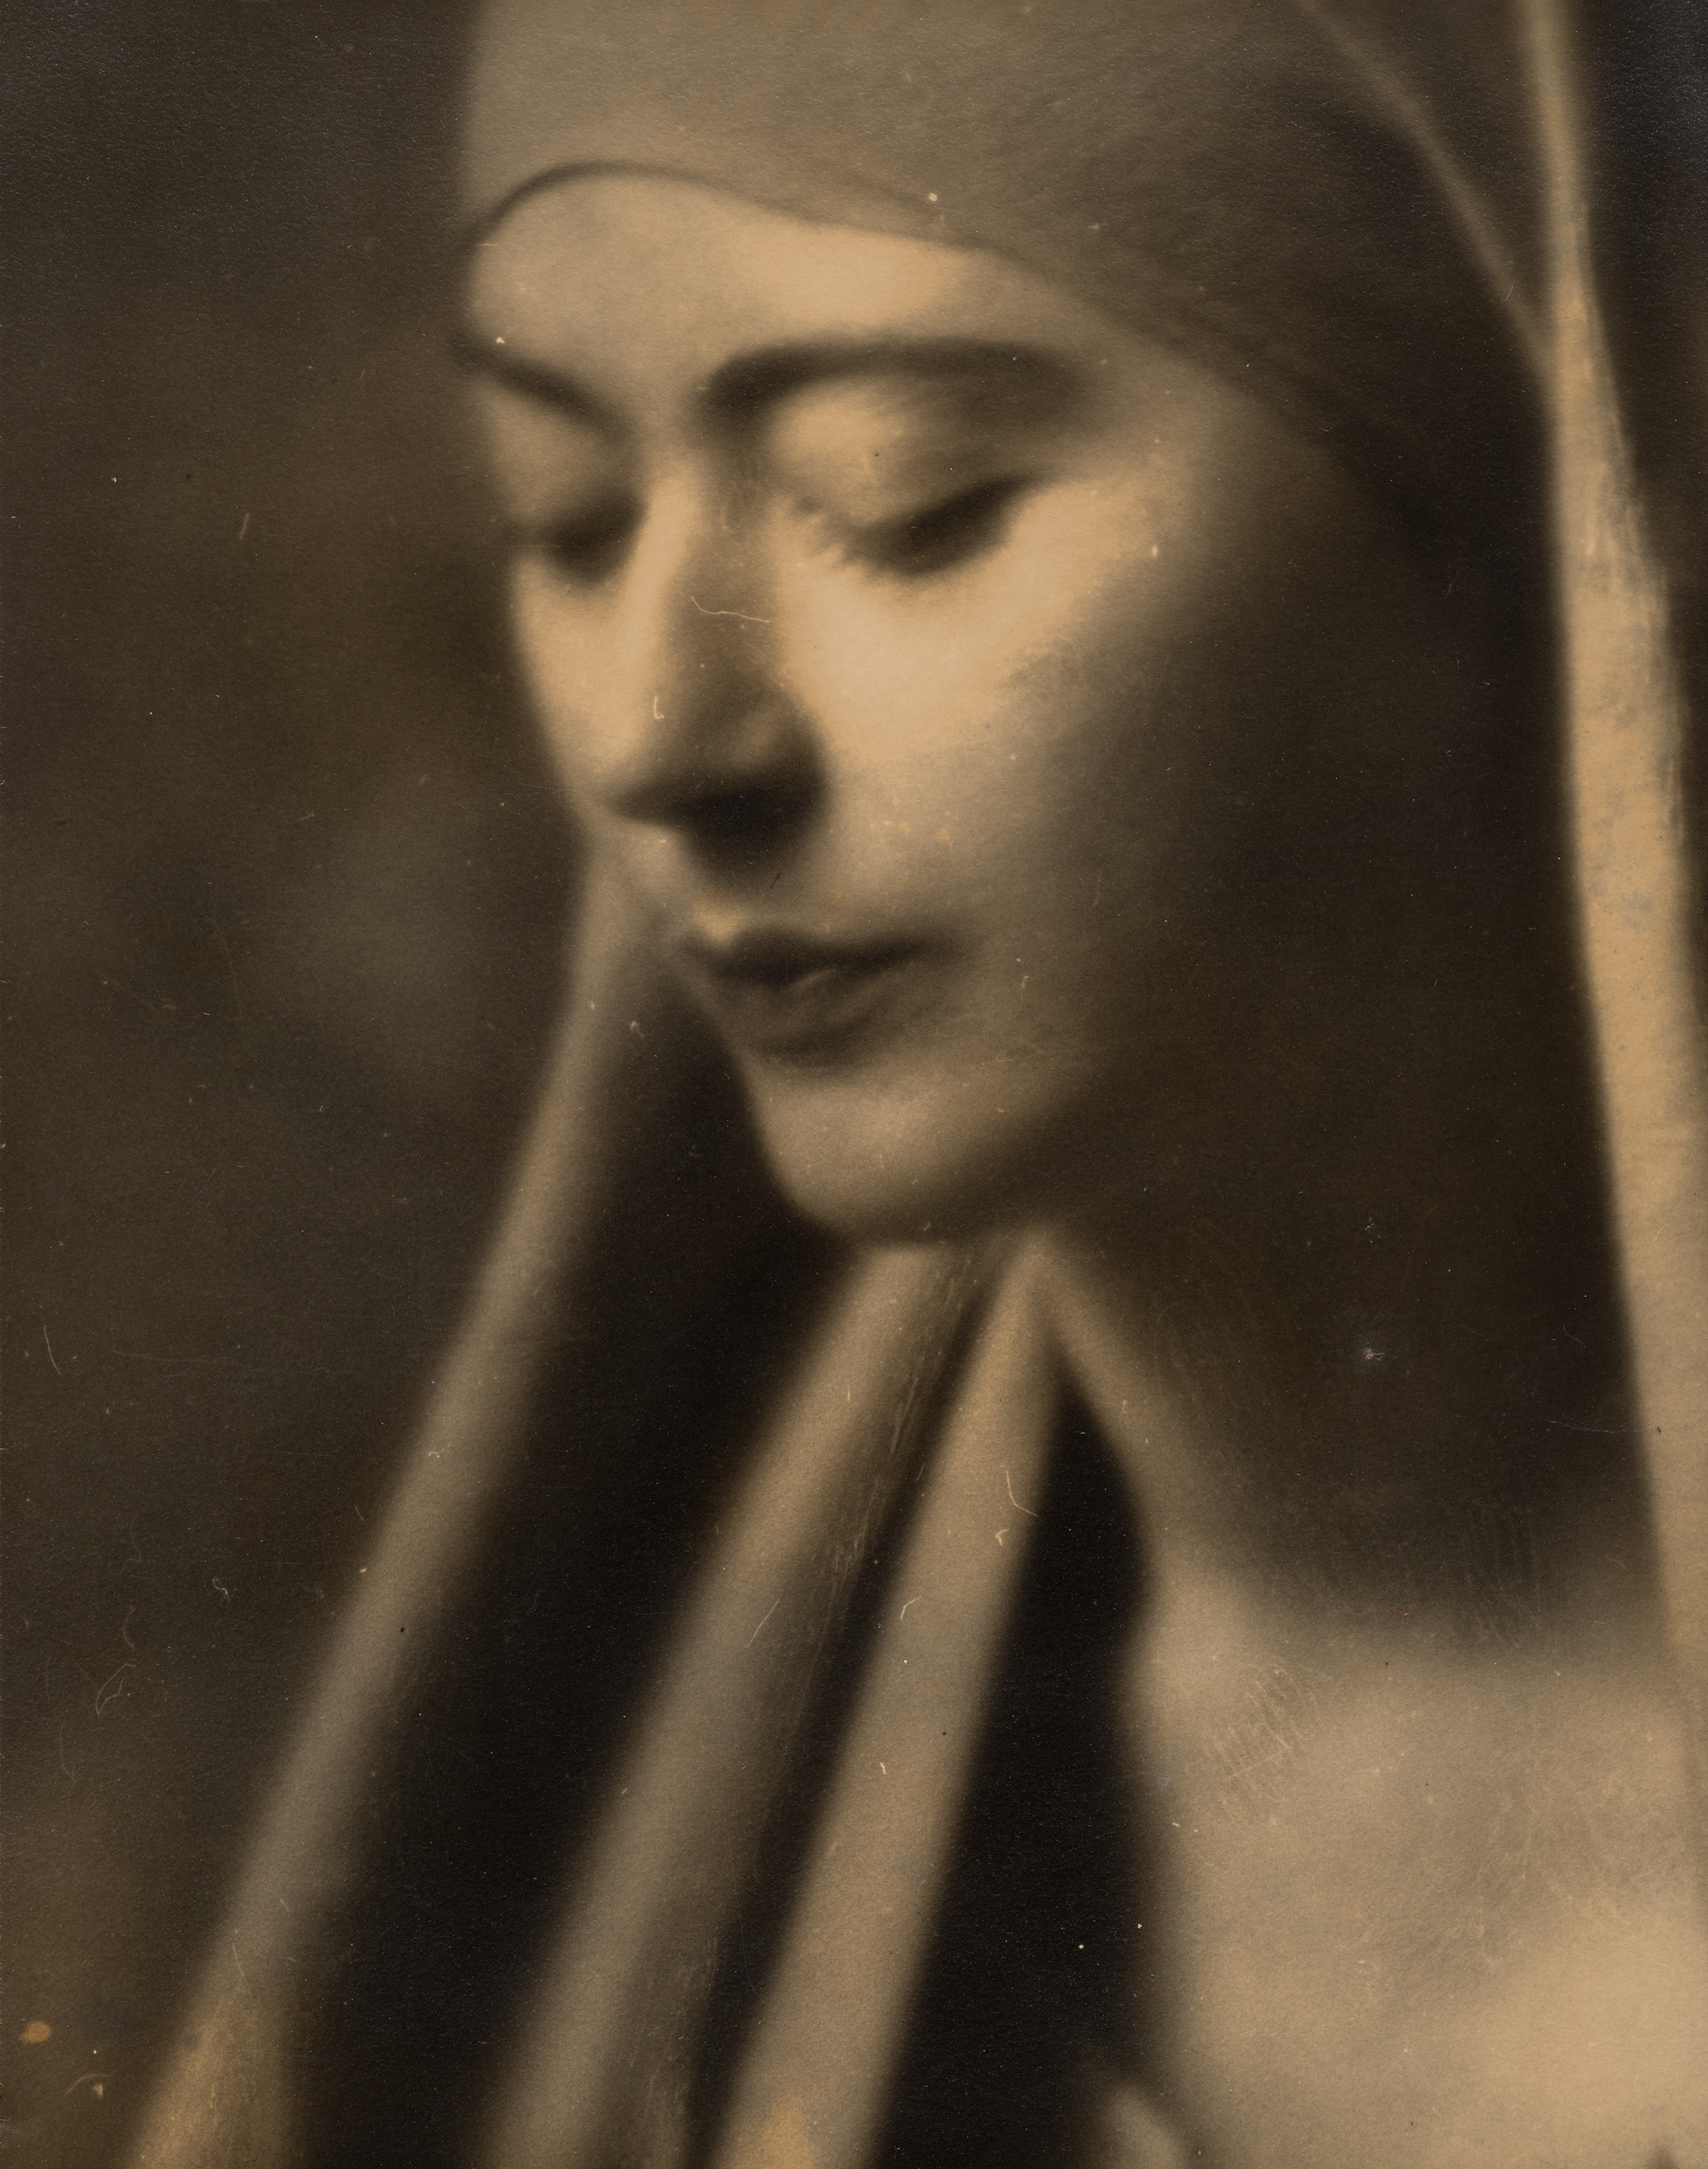 a black and white photographic portrait of a woman, showing her face and neck and wearing a head covering